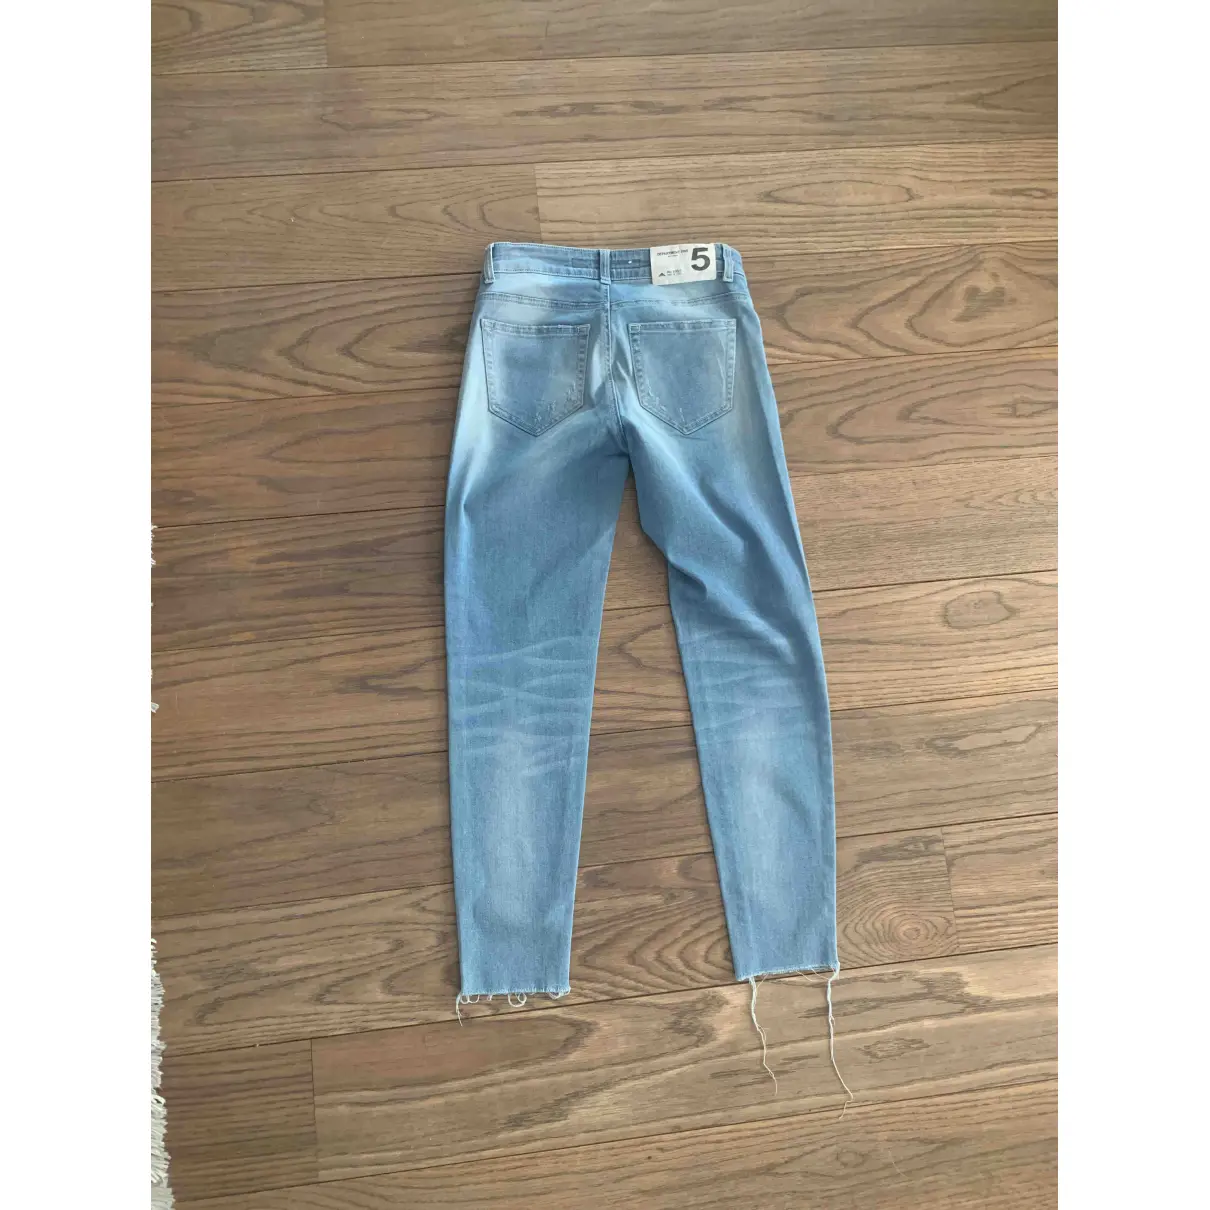 Buy Department 5 Straight jeans online